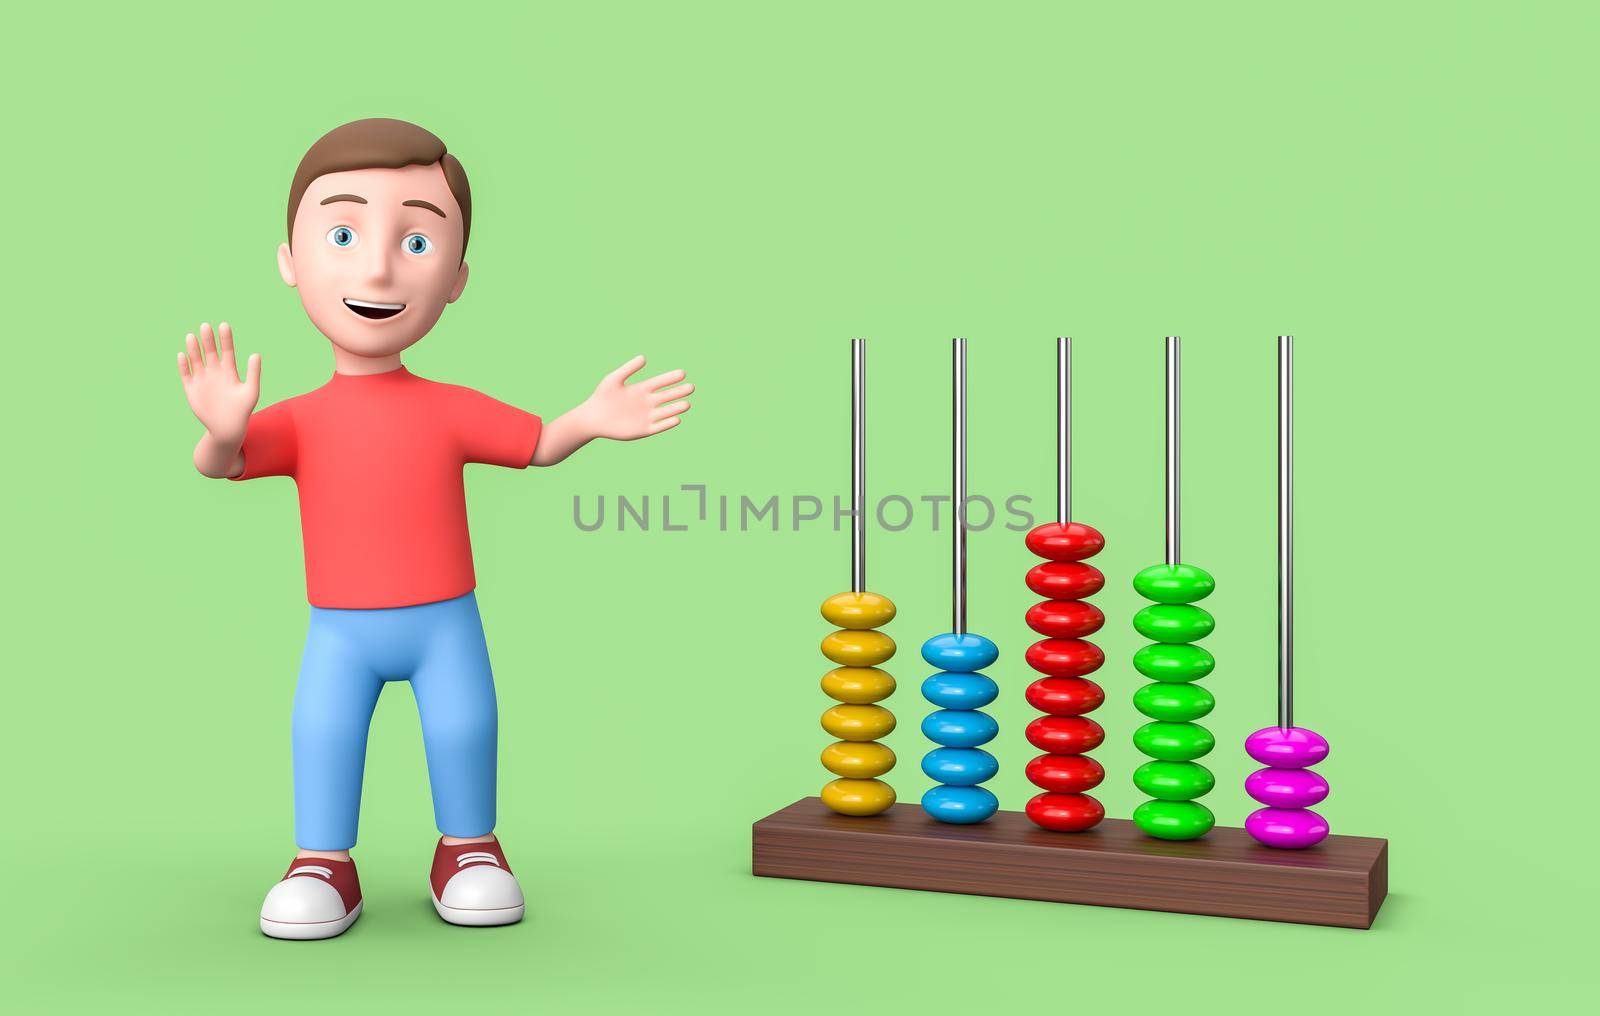 Young 3D Cartoon Character and Abacus on Green Background with Copy Space by make